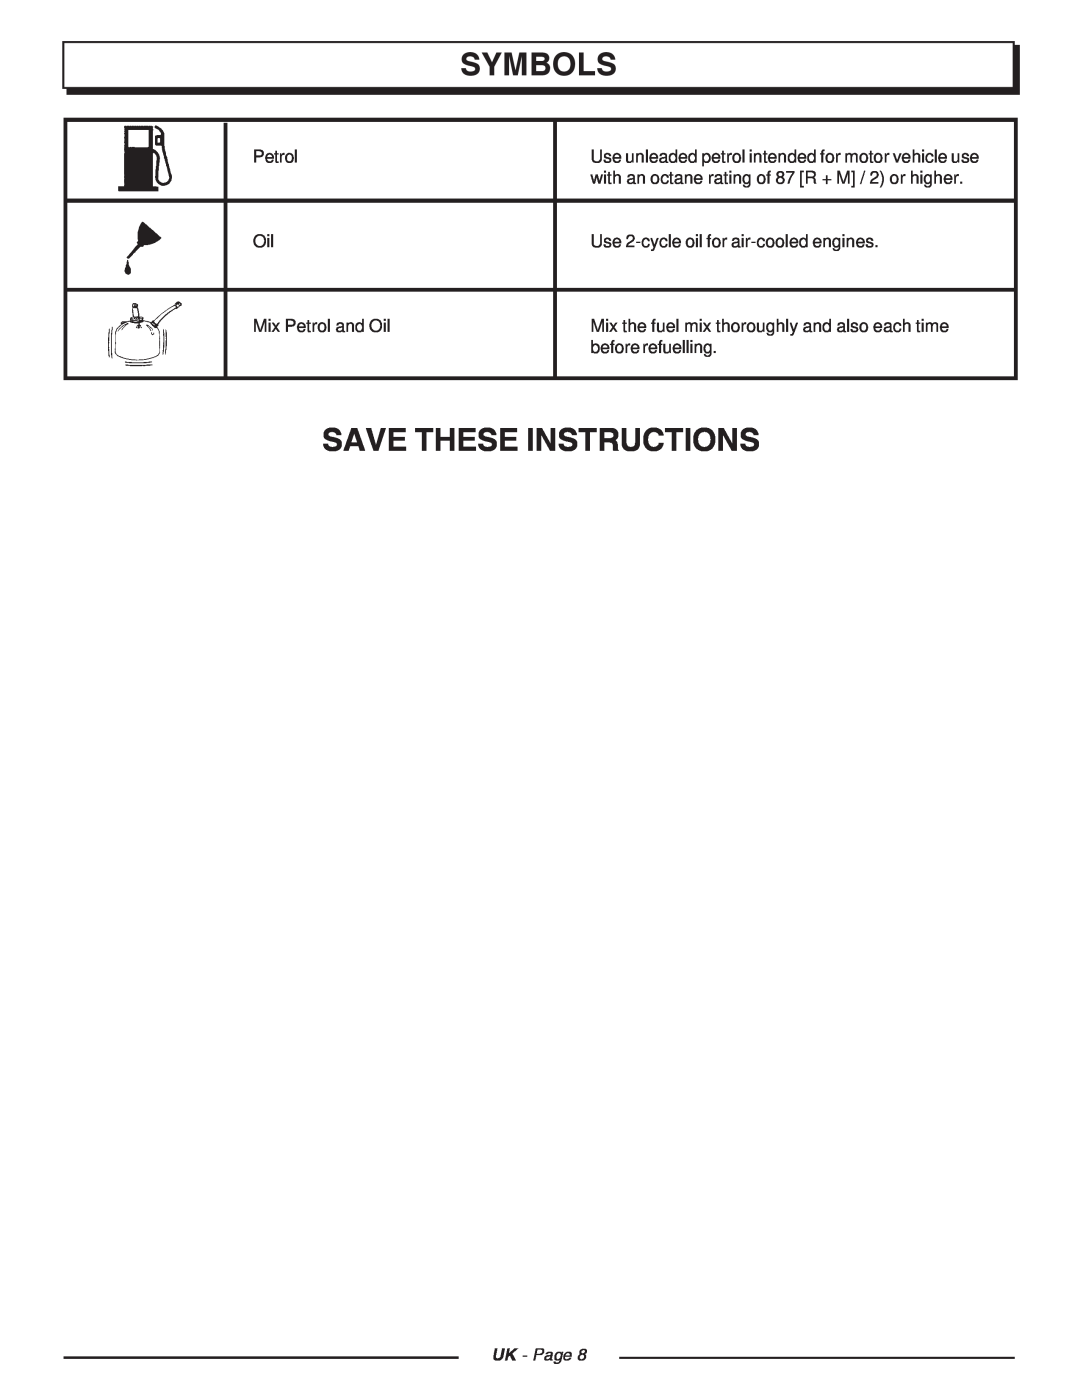 Homelite CSP3816 Save These Instructions, Symbols, Petrol, with an octane rating of 87 R + M / 2 or higher, UK - Page 